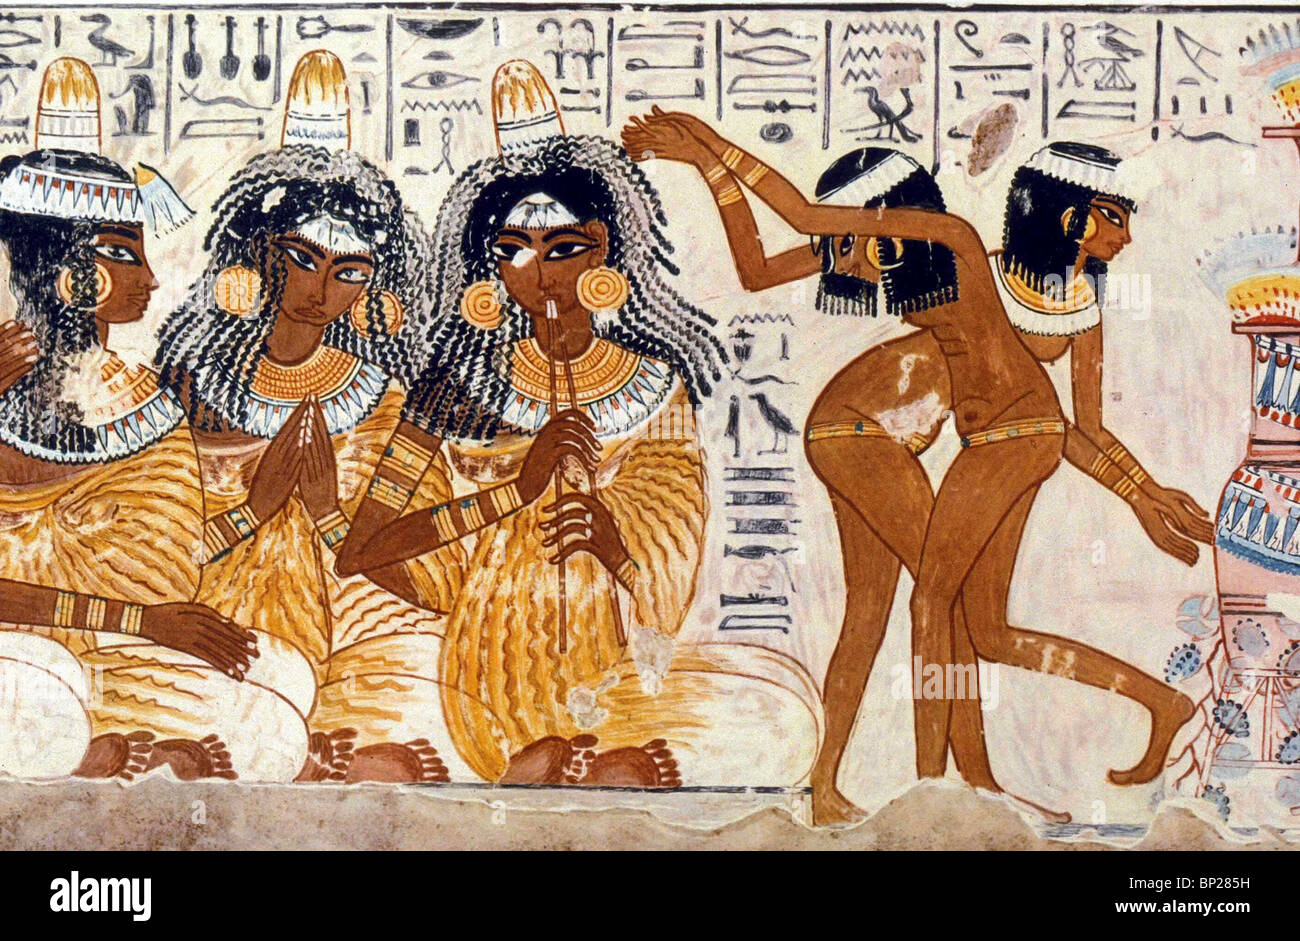 1854. SINGERS, MUSICIANS AND DANCERS, WALL PAINTING, TUTHMOSIS IV. 1420 - 1375 B.C. Stock Photo